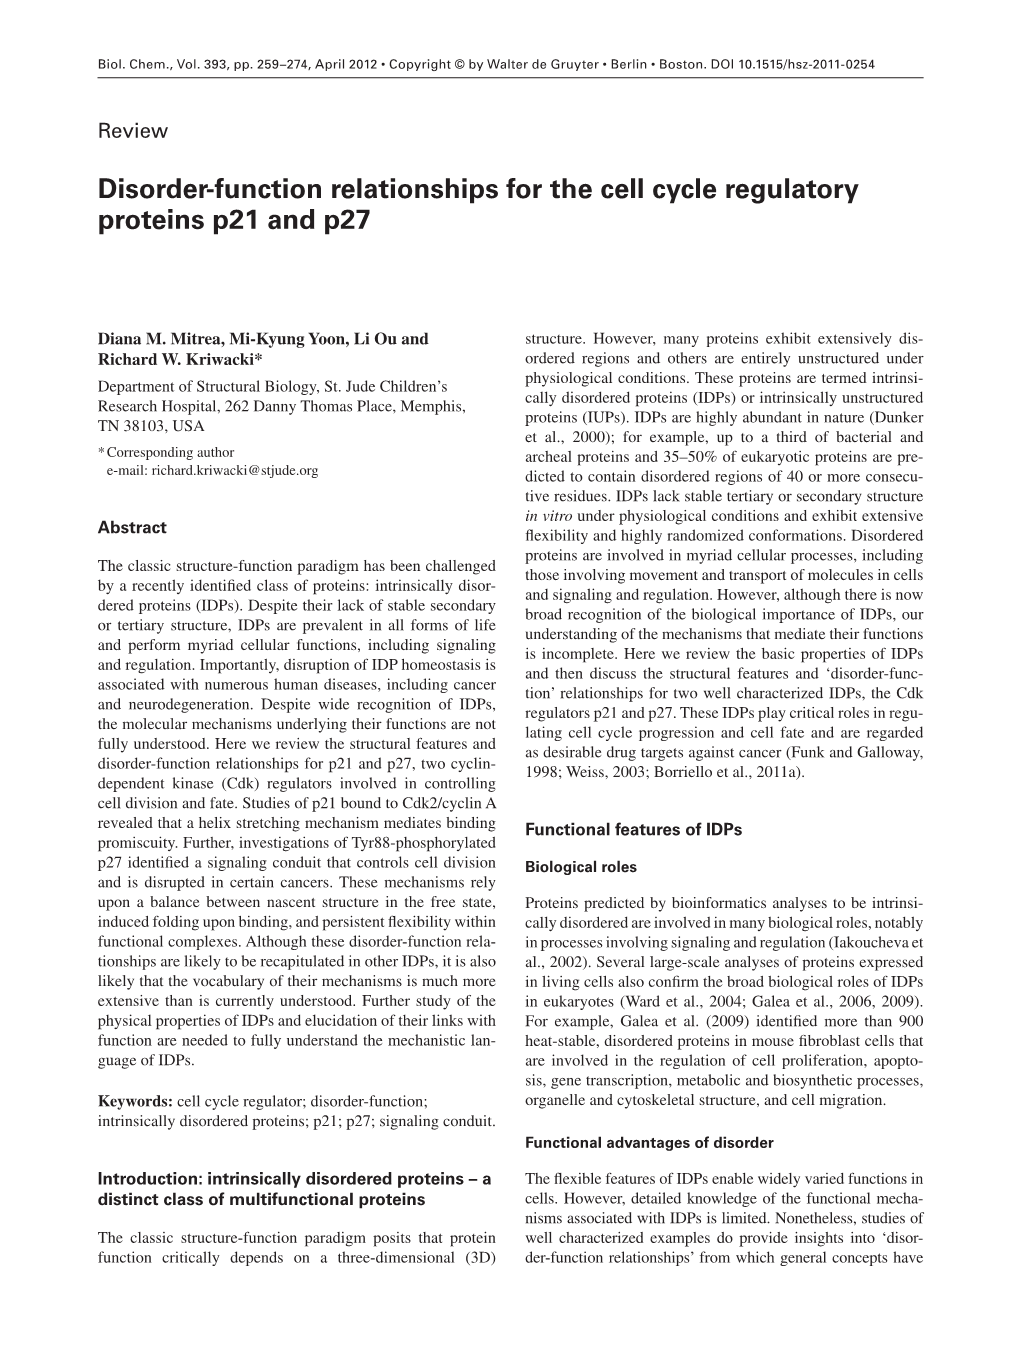 Disorder-Function Relationships for the Cell Cycle Regulatory Proteins P21 and P27